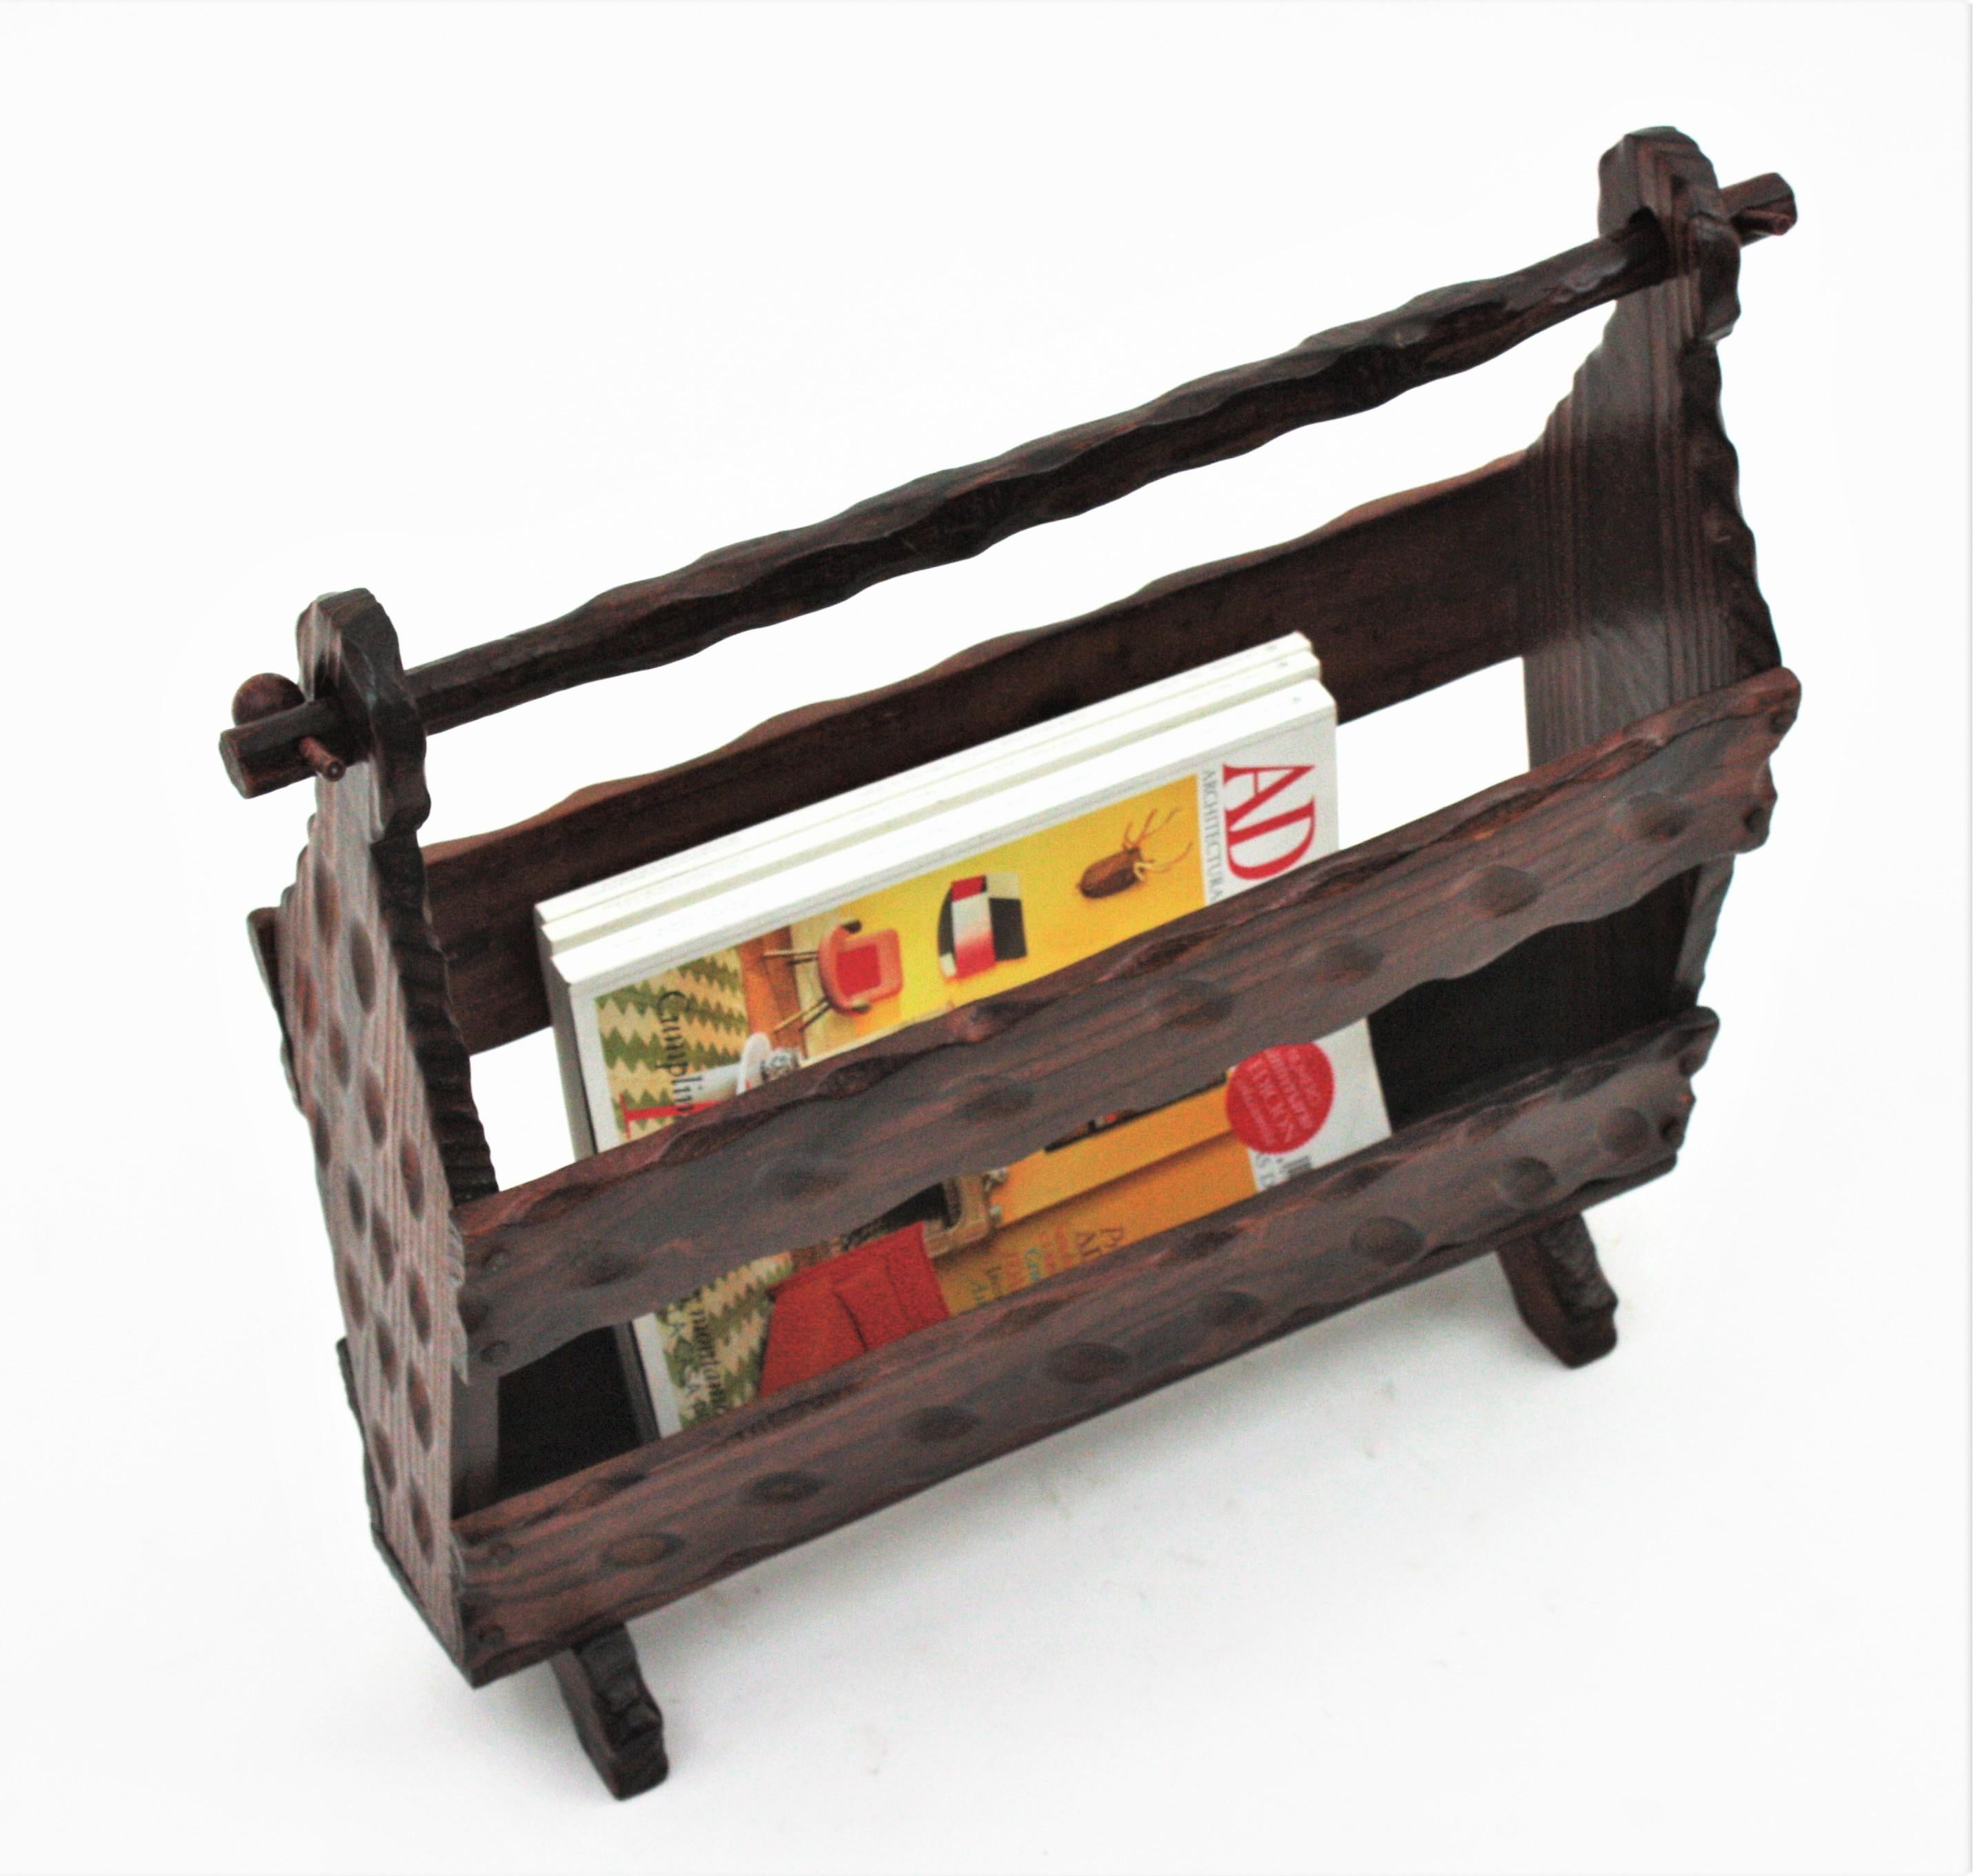 Handcarved pine wood magazine rack  Spain, 1940s.
It has scalloped details on the handle, beautiful carvings thorough and iron nails accents.
It  has a rustic finish and spanish colonial accents.
It will be a nice a addition near the sofa in a